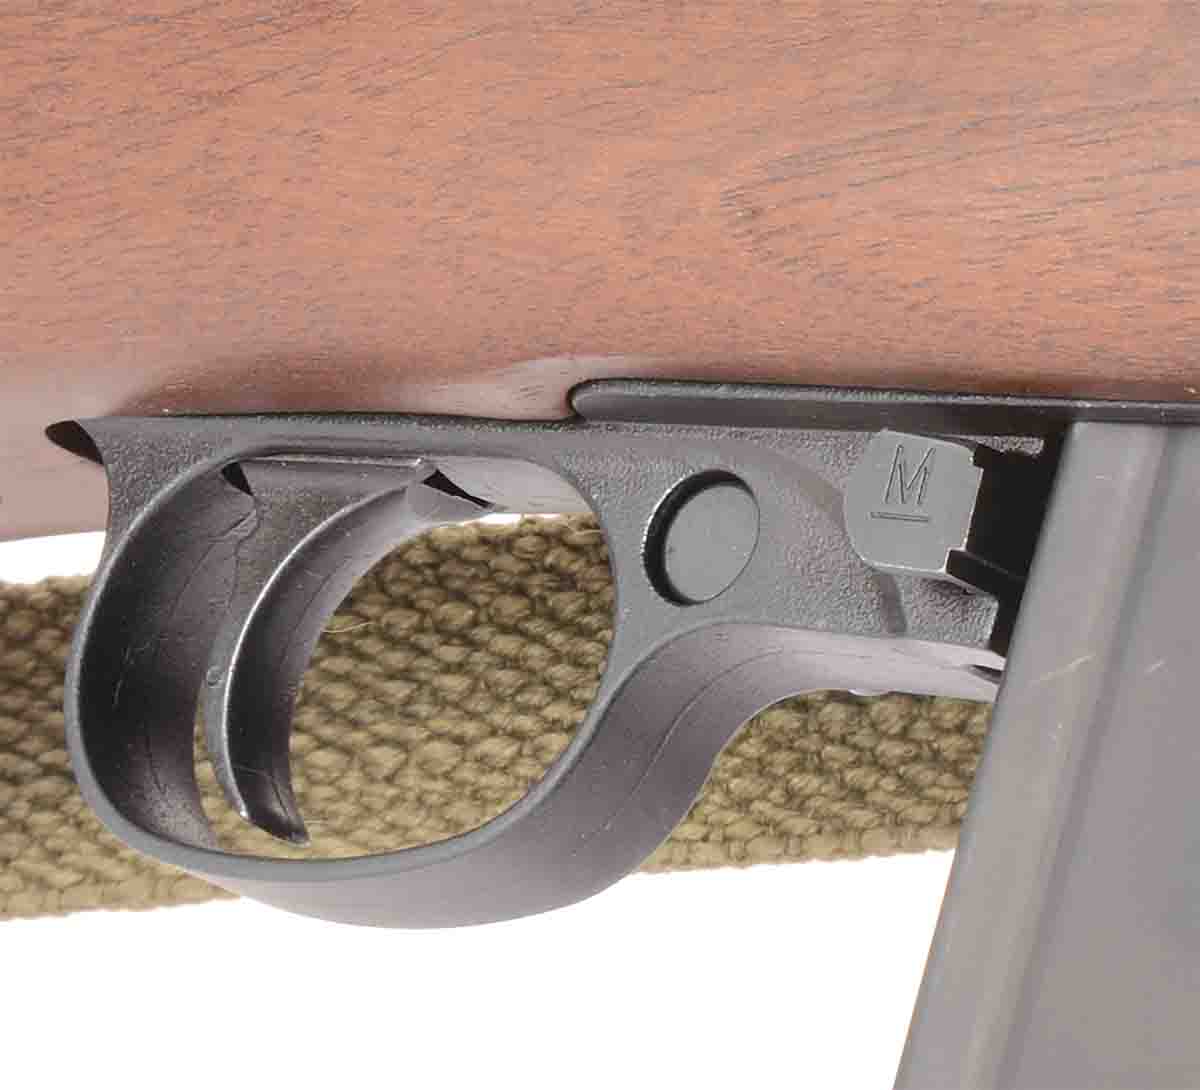 Inland’s M1 .30 Carbines use the older- style, push-button safety of early World War II M1 Carbines.